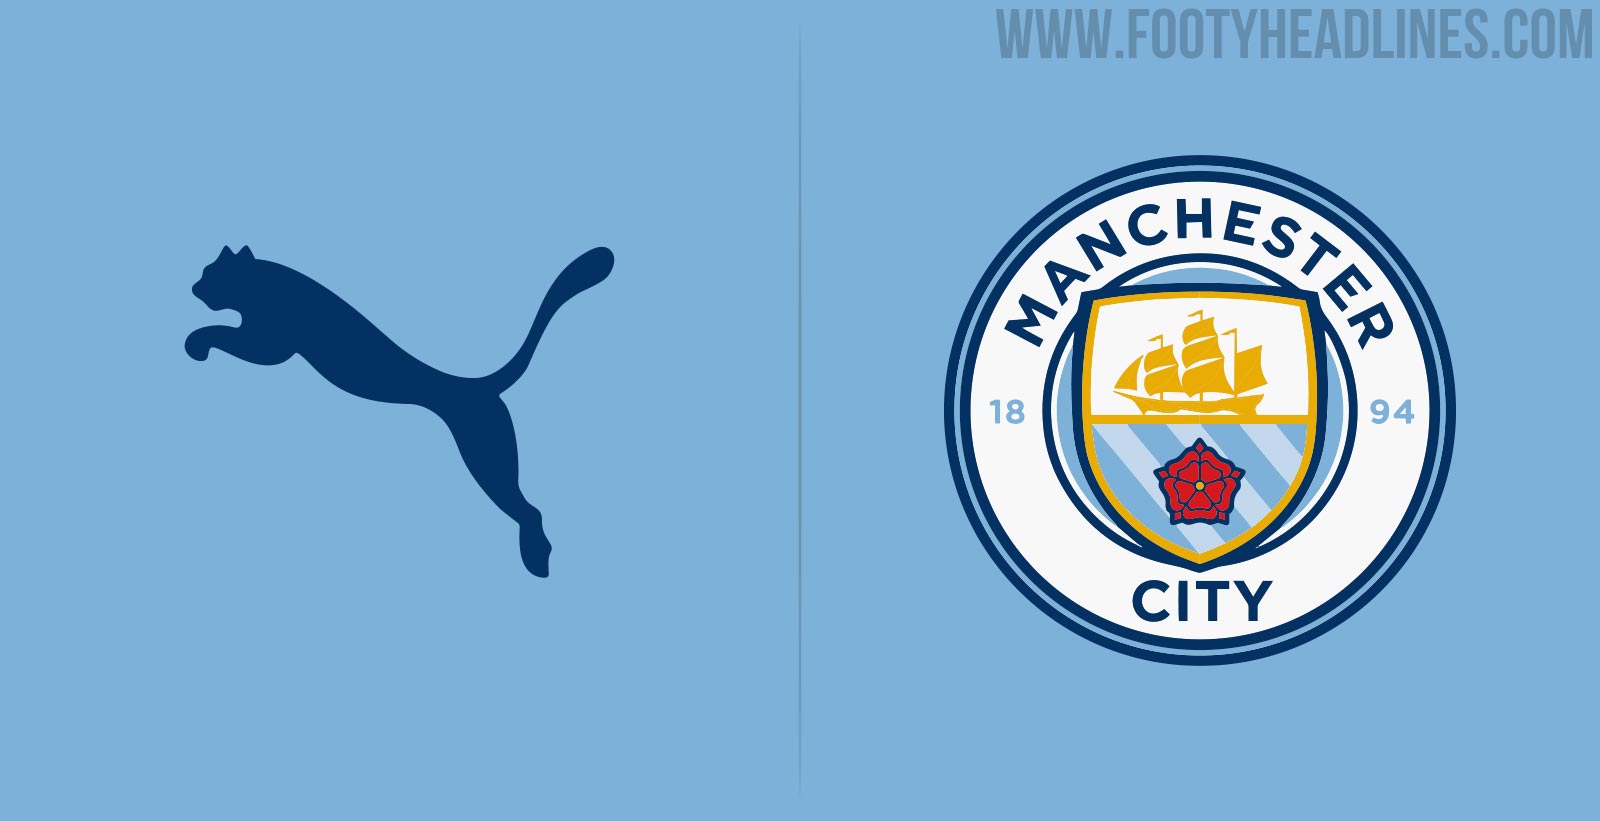 manchester-city-to-sign-50m-year-puma-kit-deal.jpg